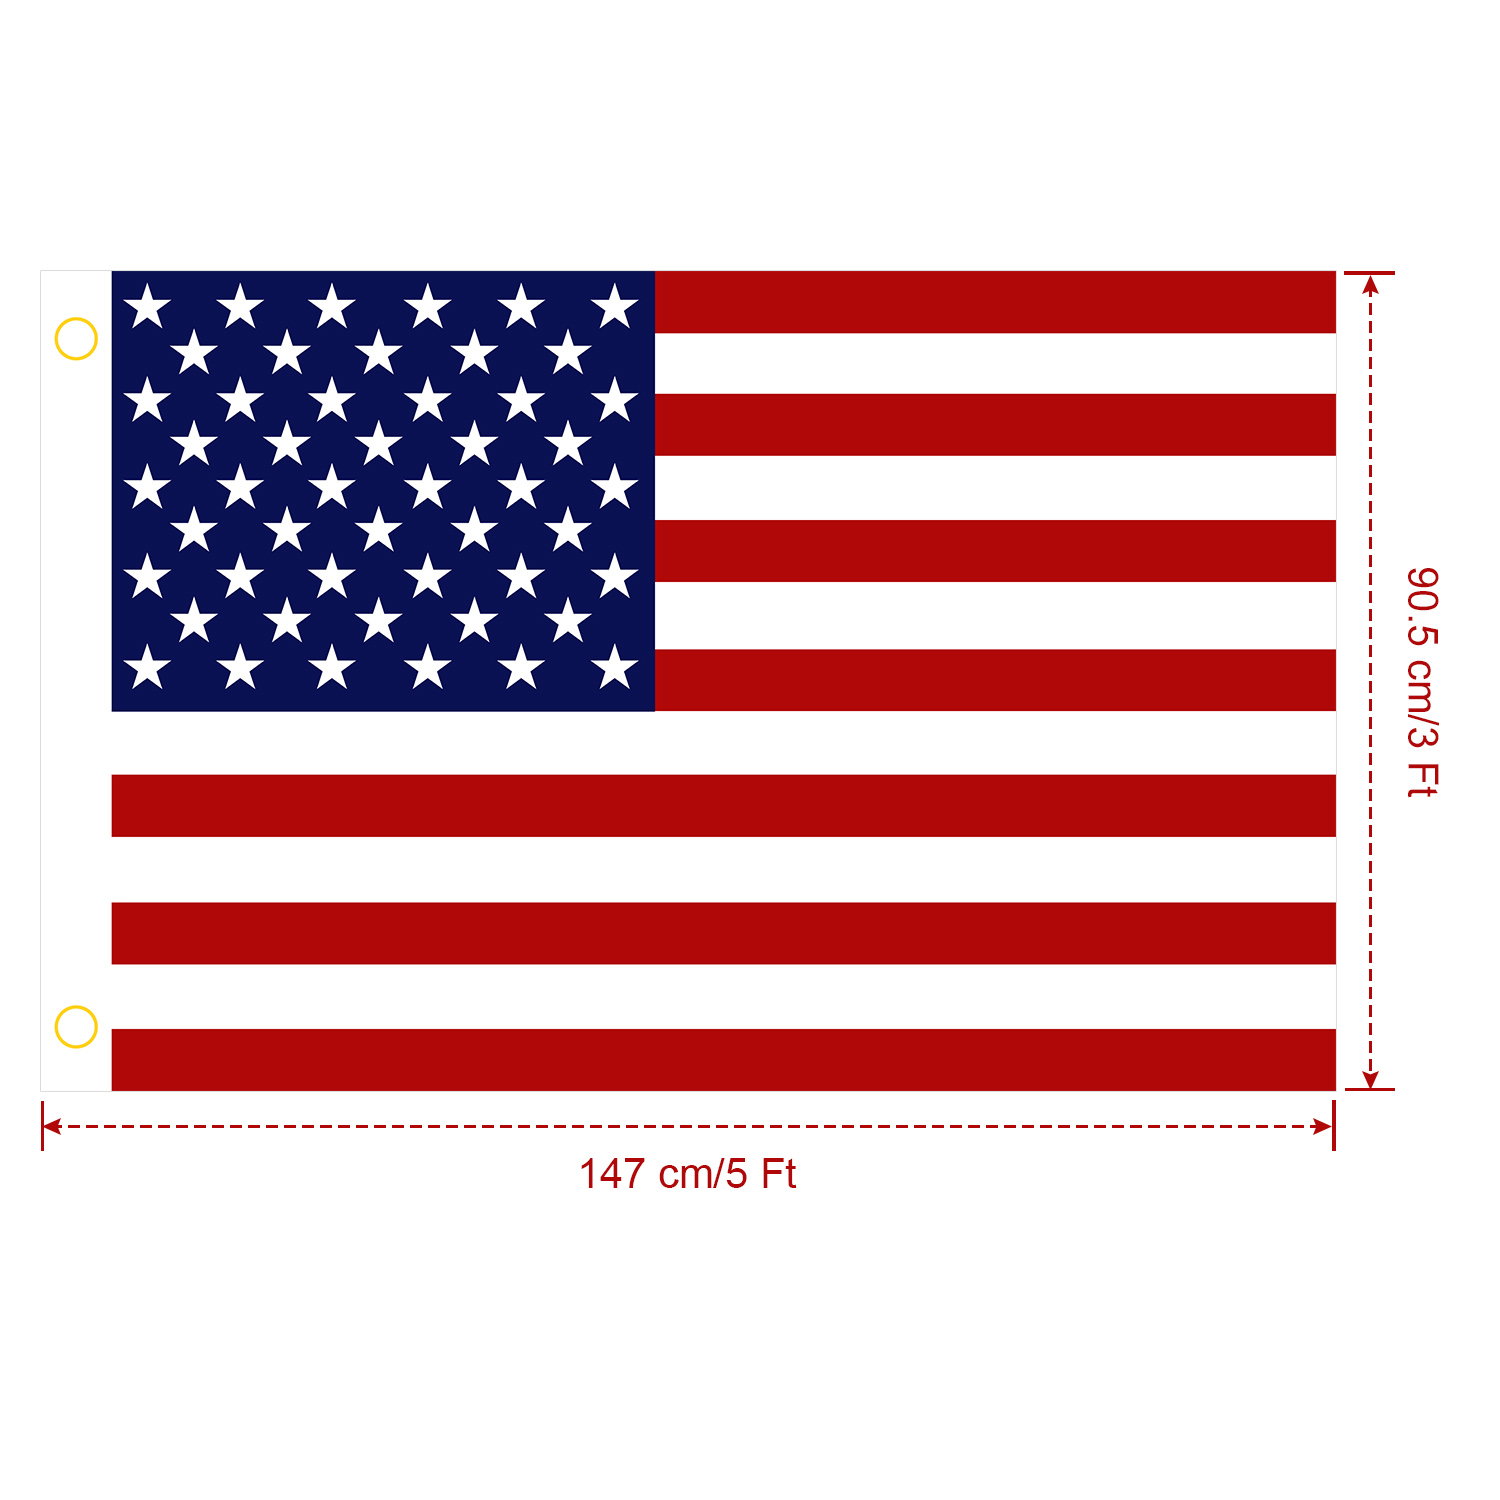 4 Pcs 3 x 5 Ft American US Flags Vivid Color and UV Fade Resistant Canvas Header Double Stitched with Brass Grommets for Indoor Outdoor